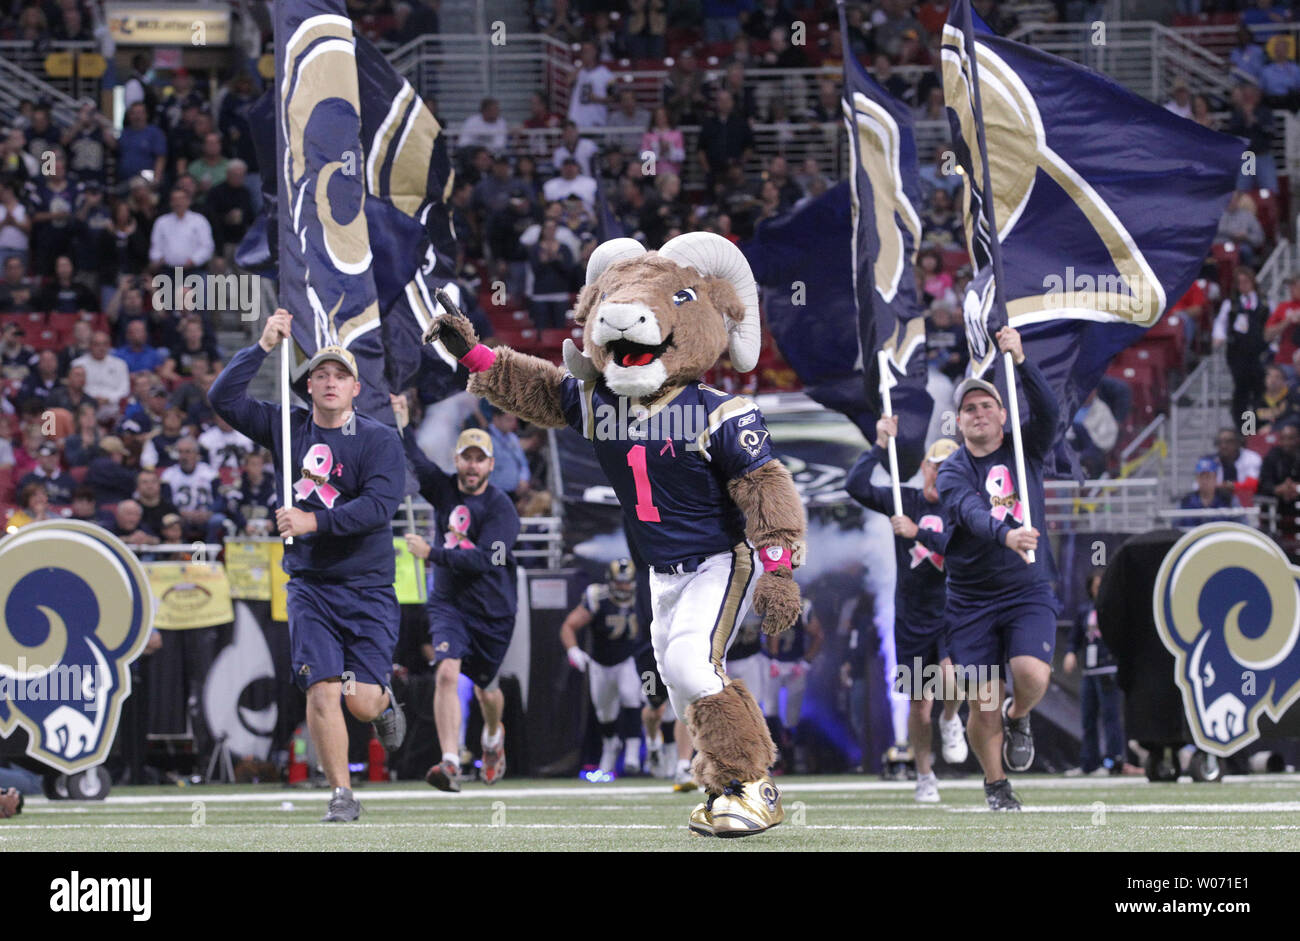 The St. Louis Rams mascot Rampage, leads the team onto the field for a game against the Washington Redskins at the Edward Jones Dome in St. Louis on October 2, 2011. UPI/Bill Greenblatt Stock Photo